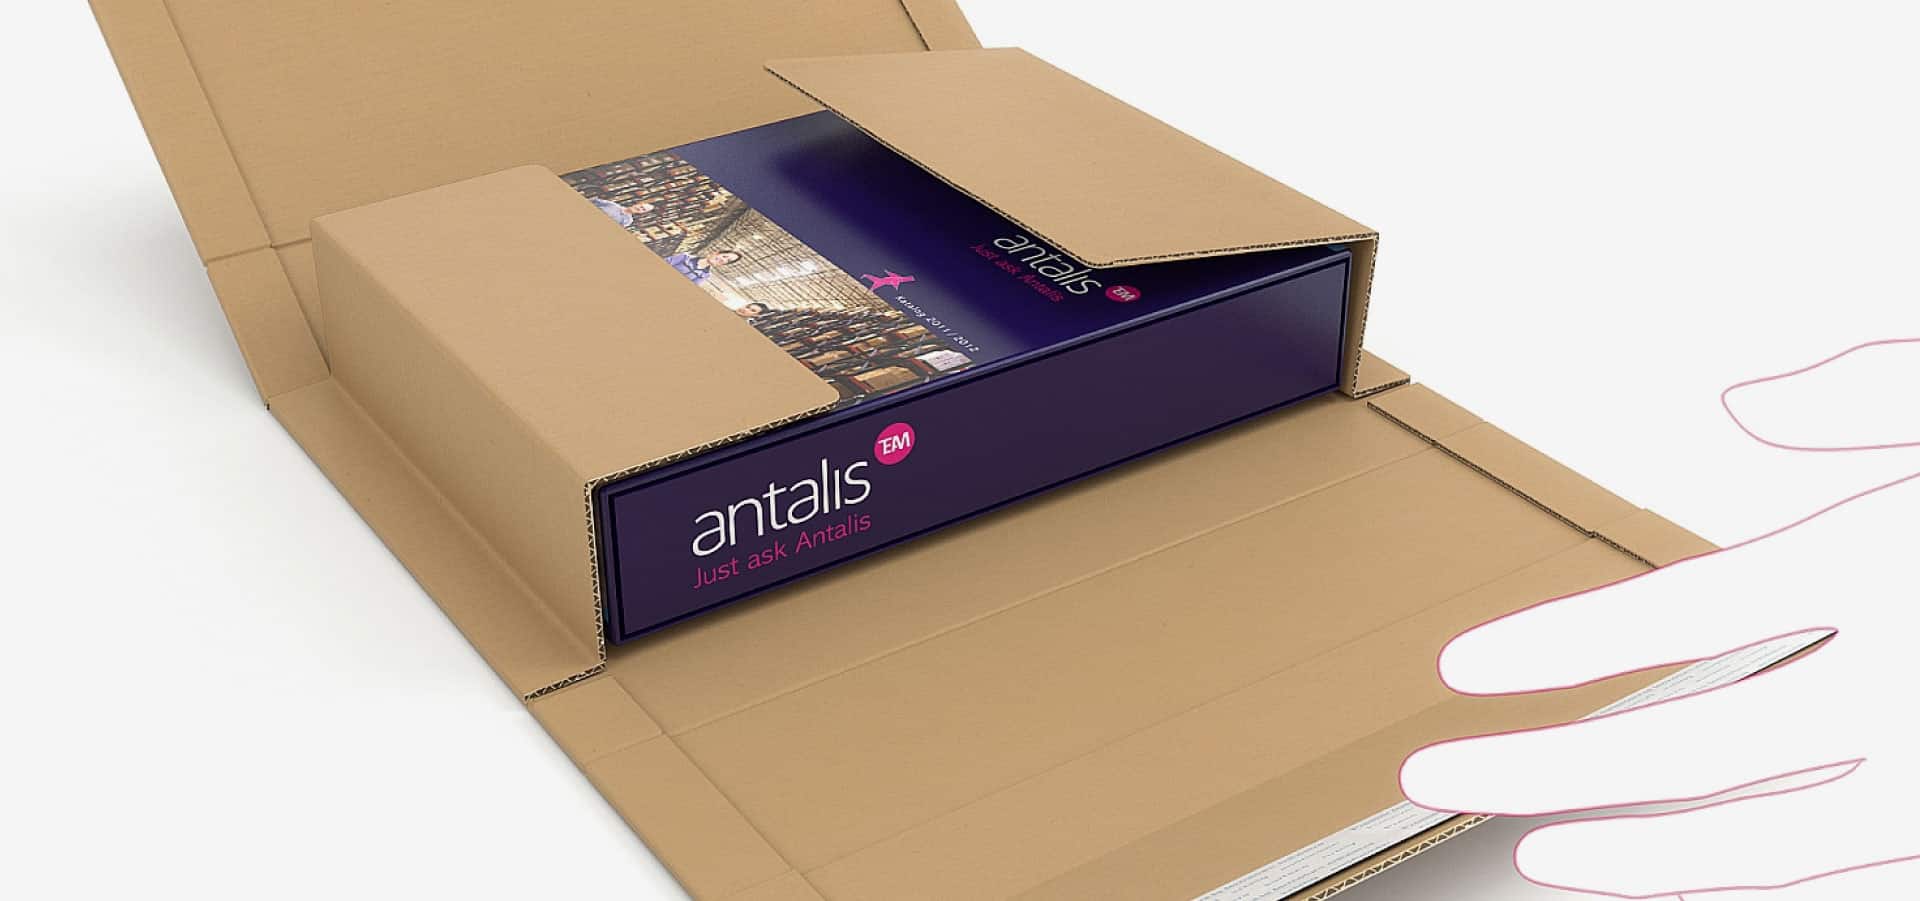 Antalis acquires Arjowiggins brands from administrator